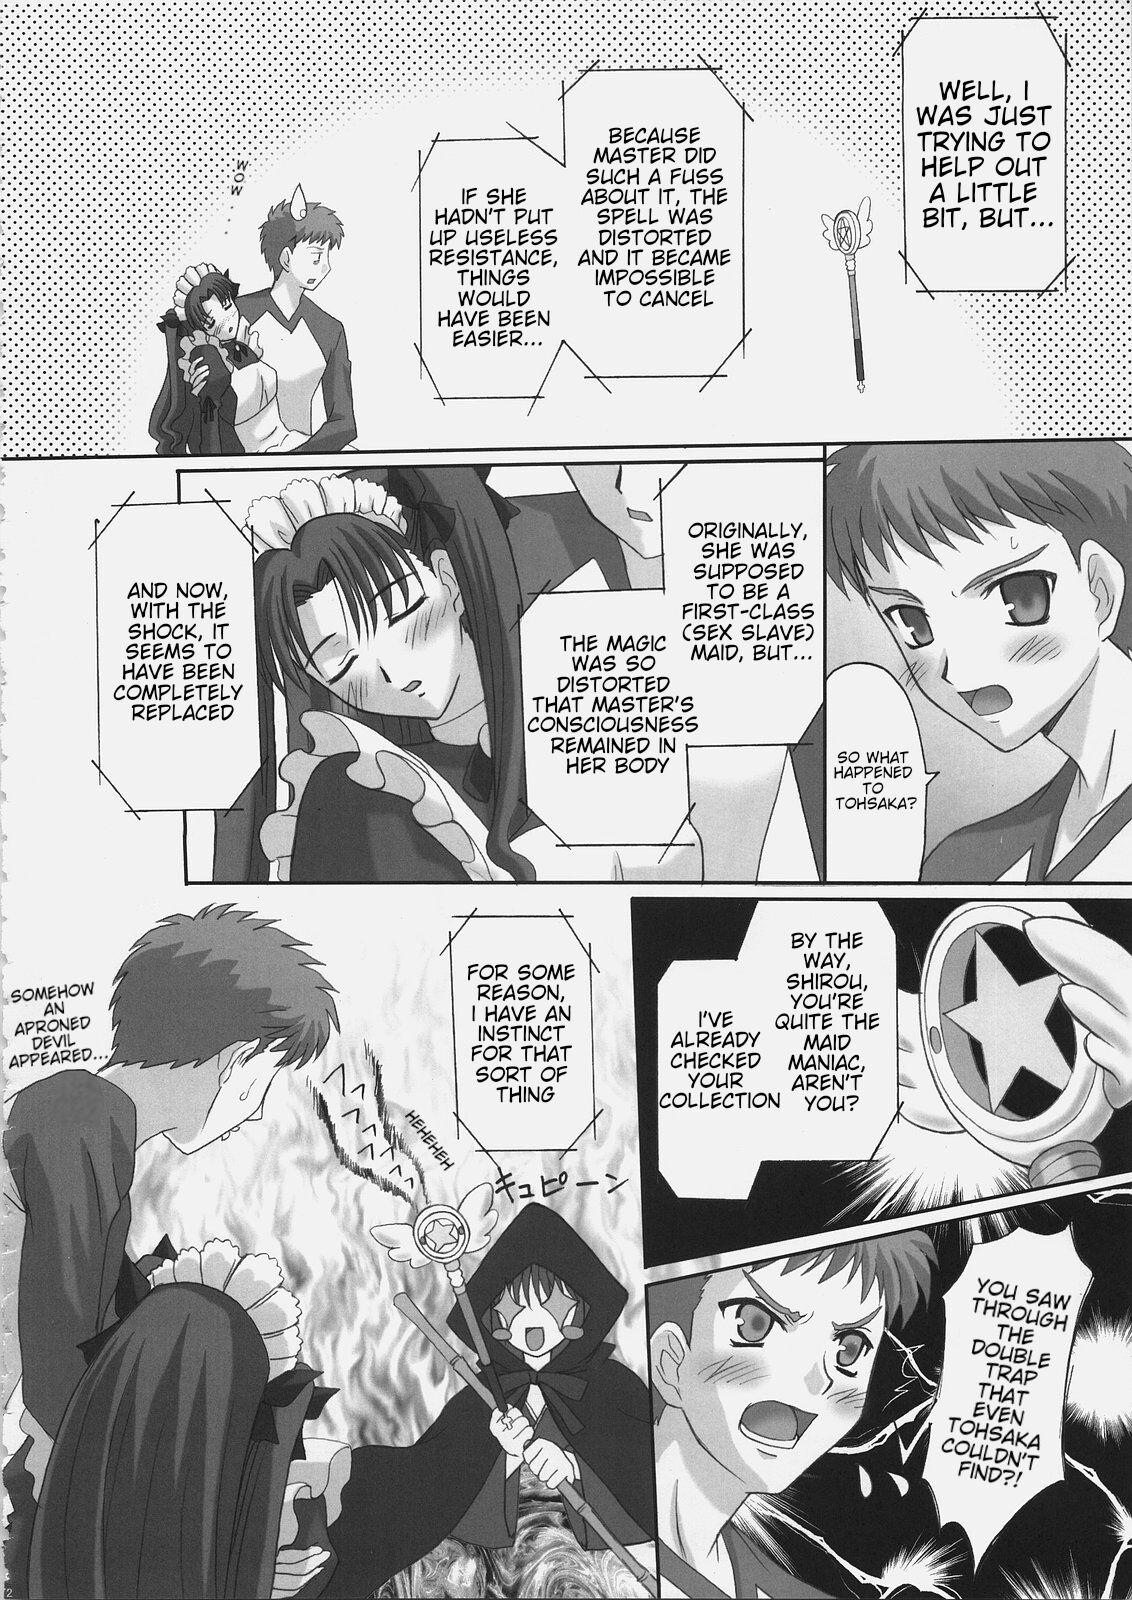 Transexual EX PERIENCE - Fate stay night Time - Page 11